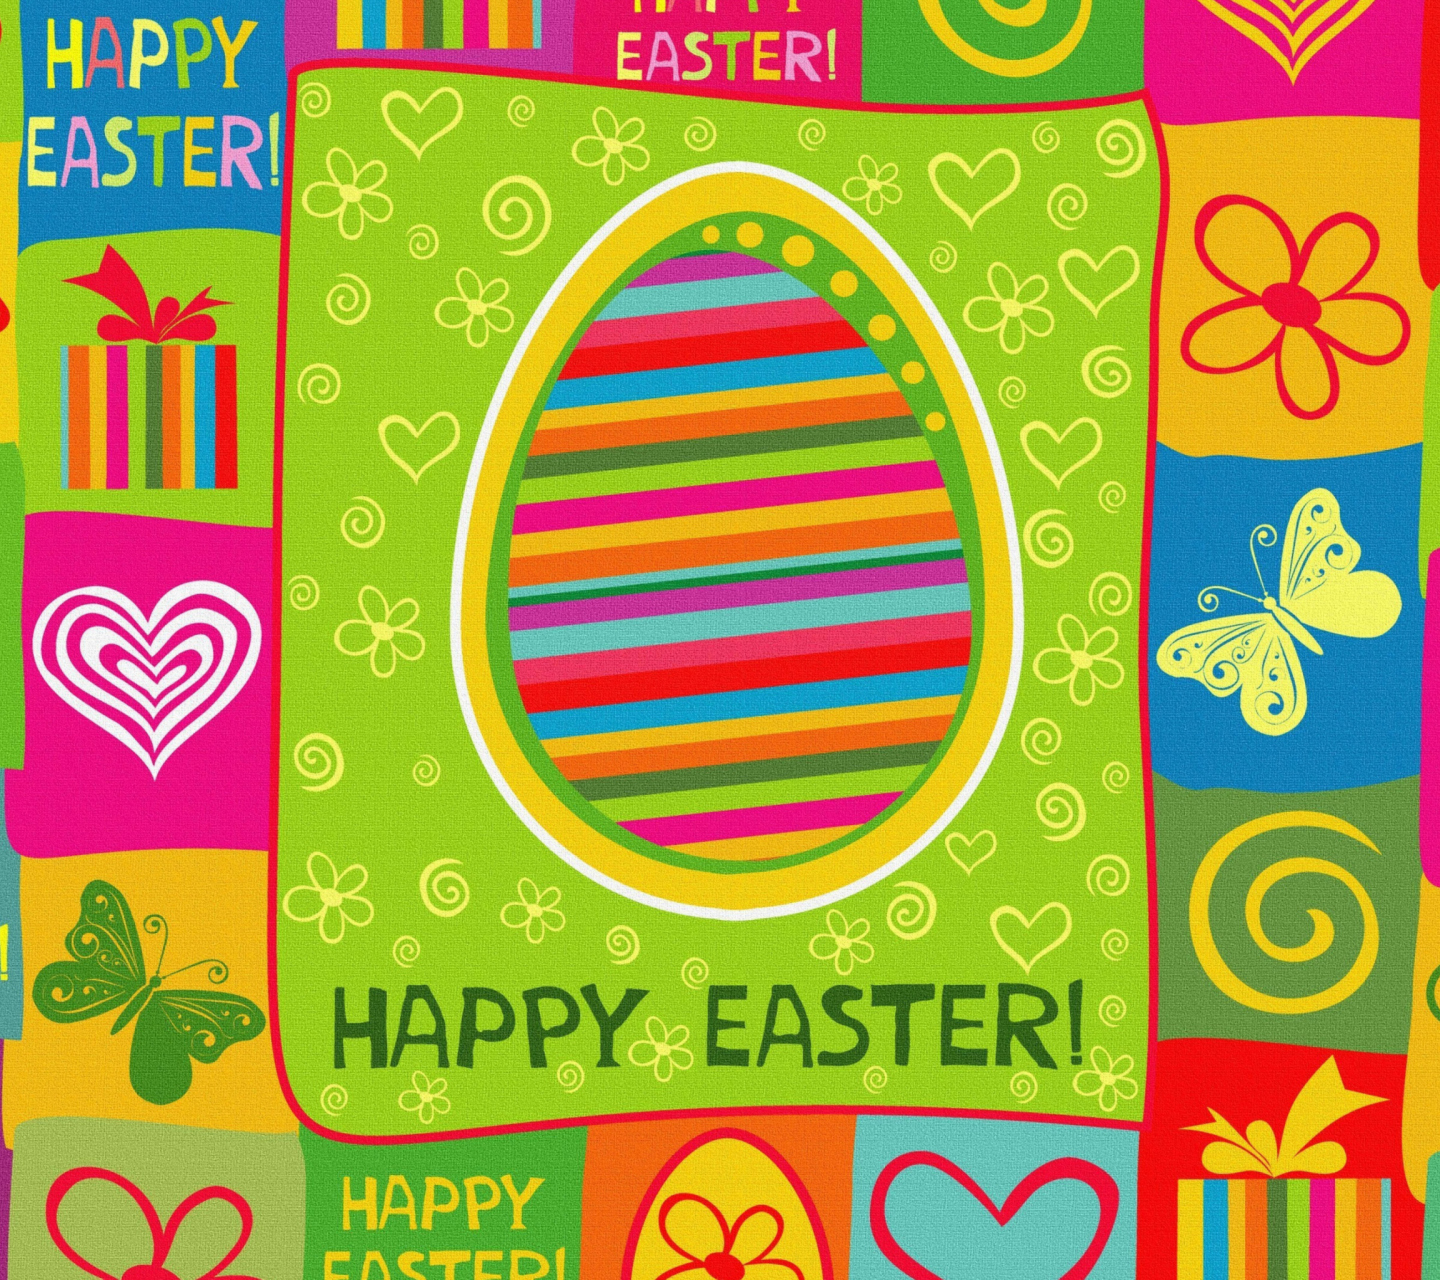 Happy Easter Background wallpaper 1440x1280